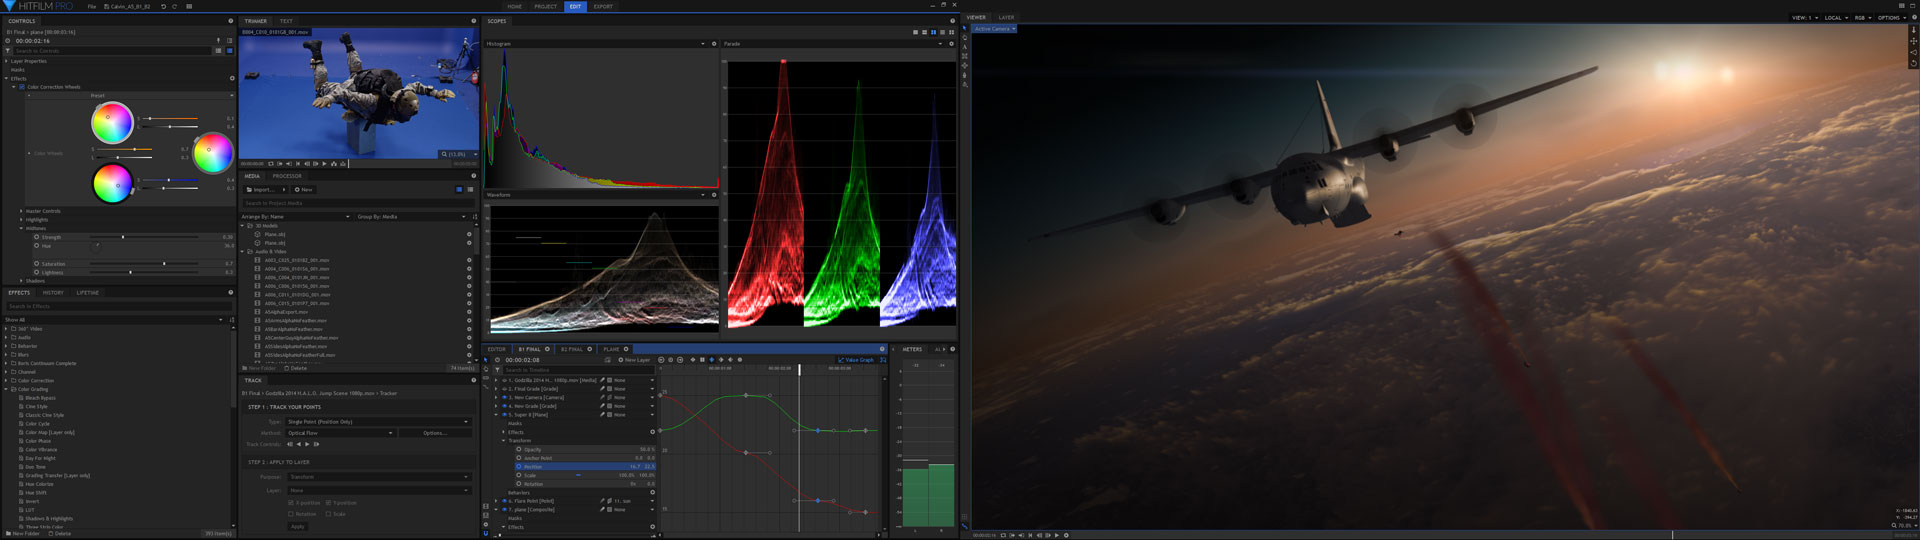 HitFilm Pro interface with color scopes and multi-screen preview of plane composite from Halo Jump VFX masterclass